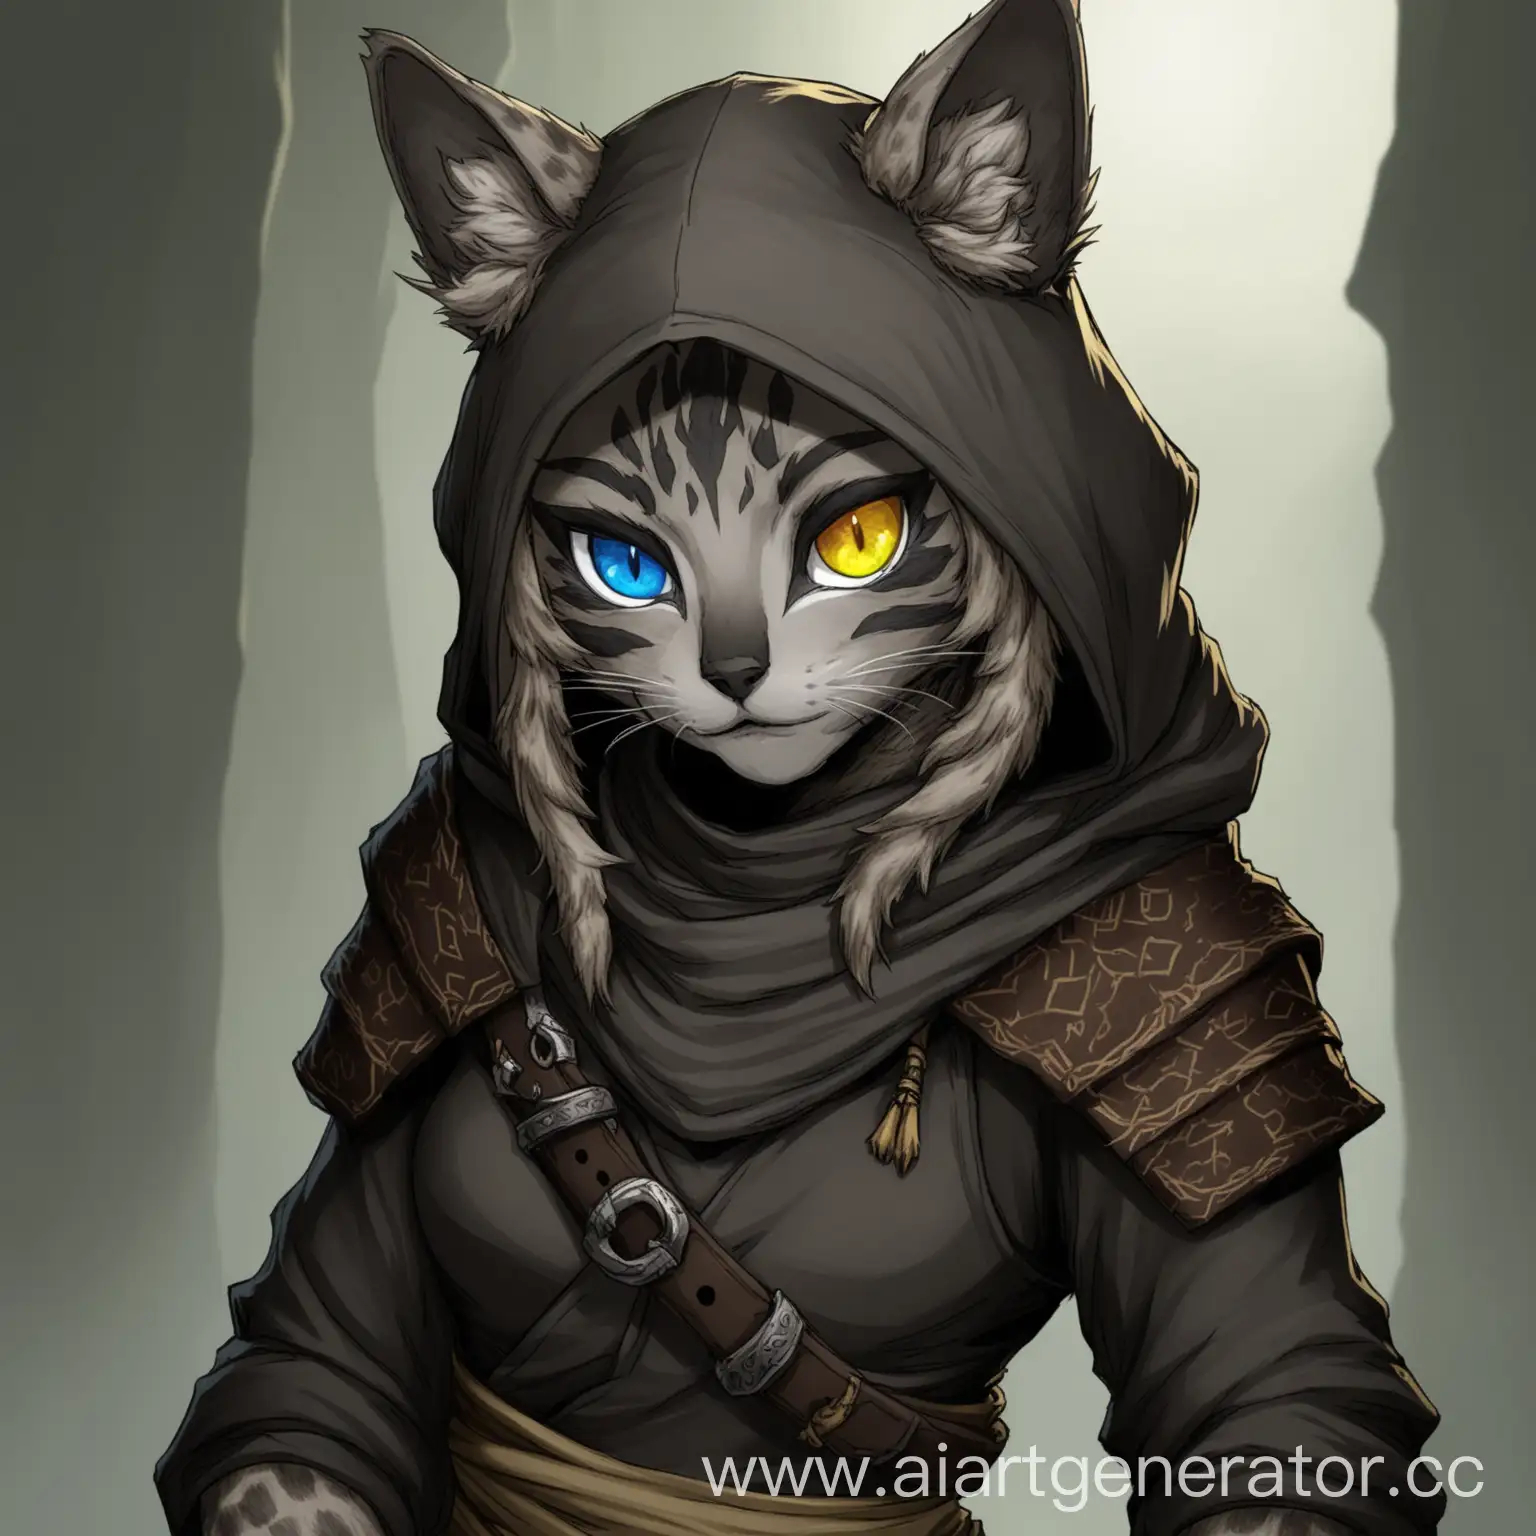 Tabaxi-Rogue-with-Heterochromia-Eyes-in-Dimly-Lit-Alley